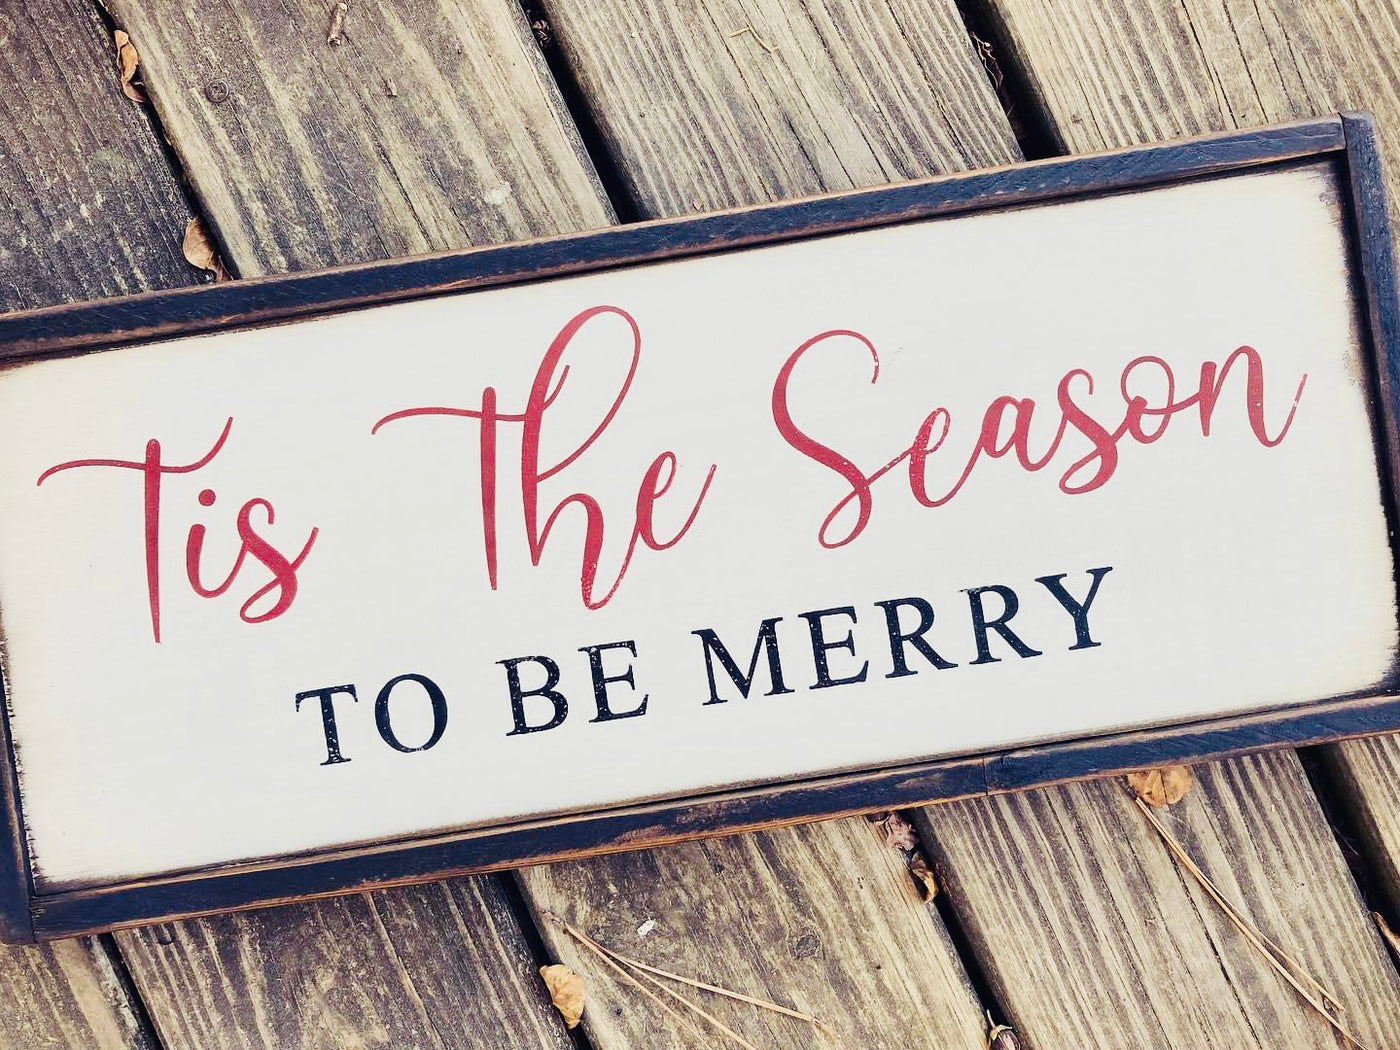 Handmade wooden holiday sign reads this the season to be merry. White background with red and black lettering.